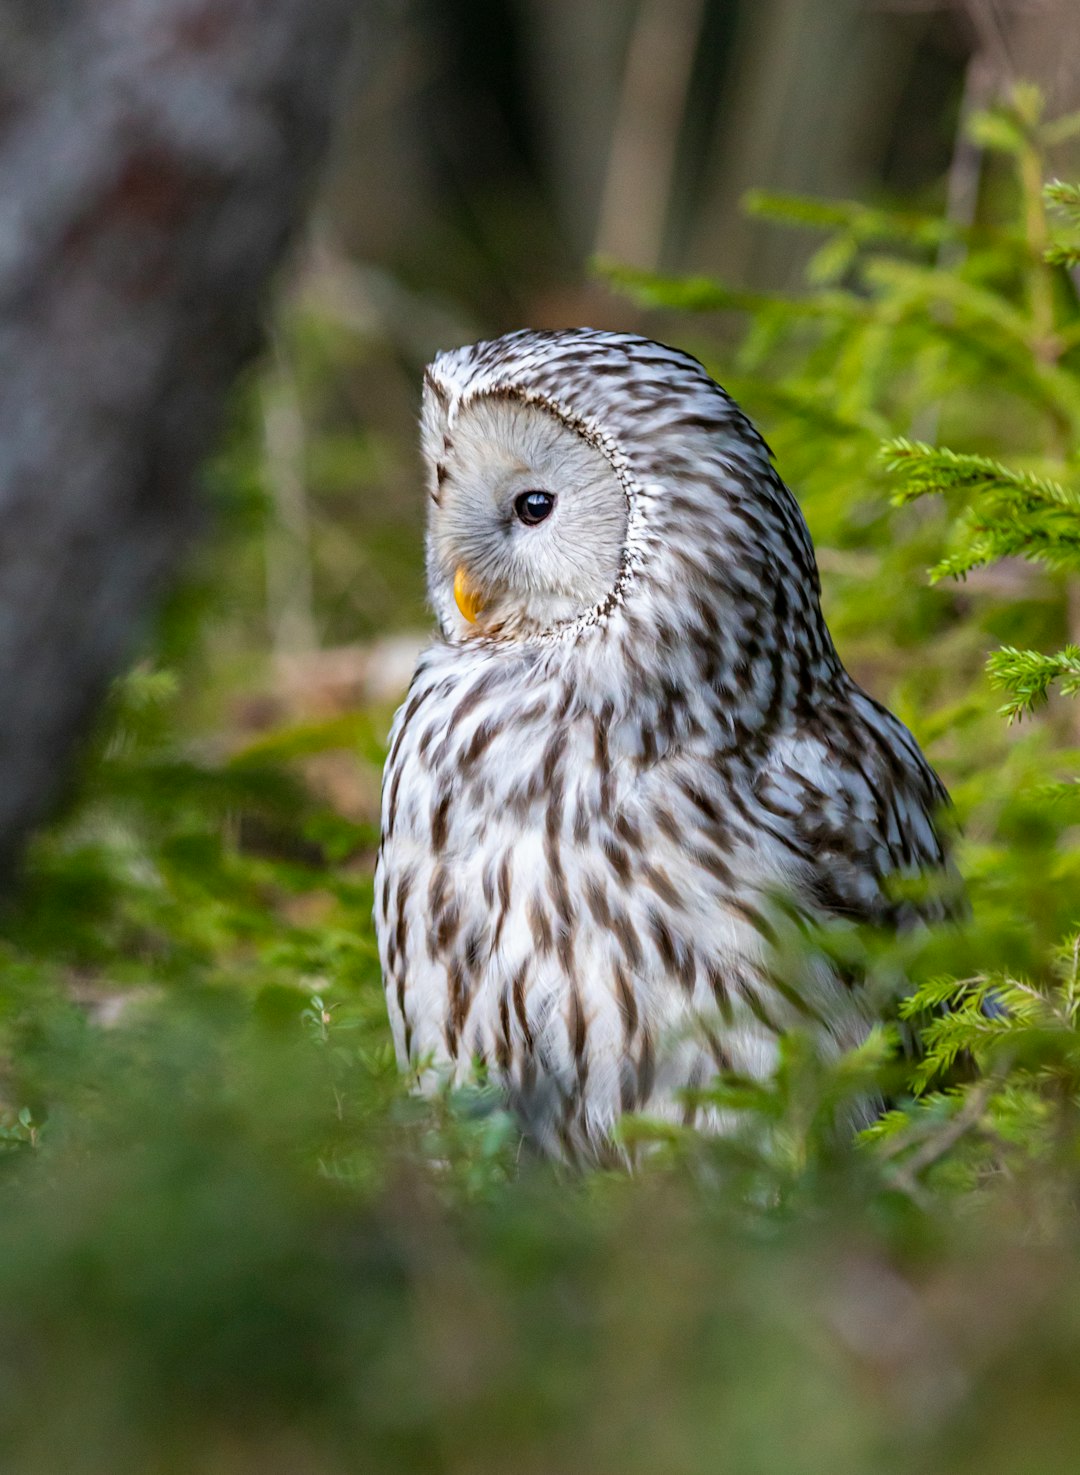 white and black owl on green grass during daytime